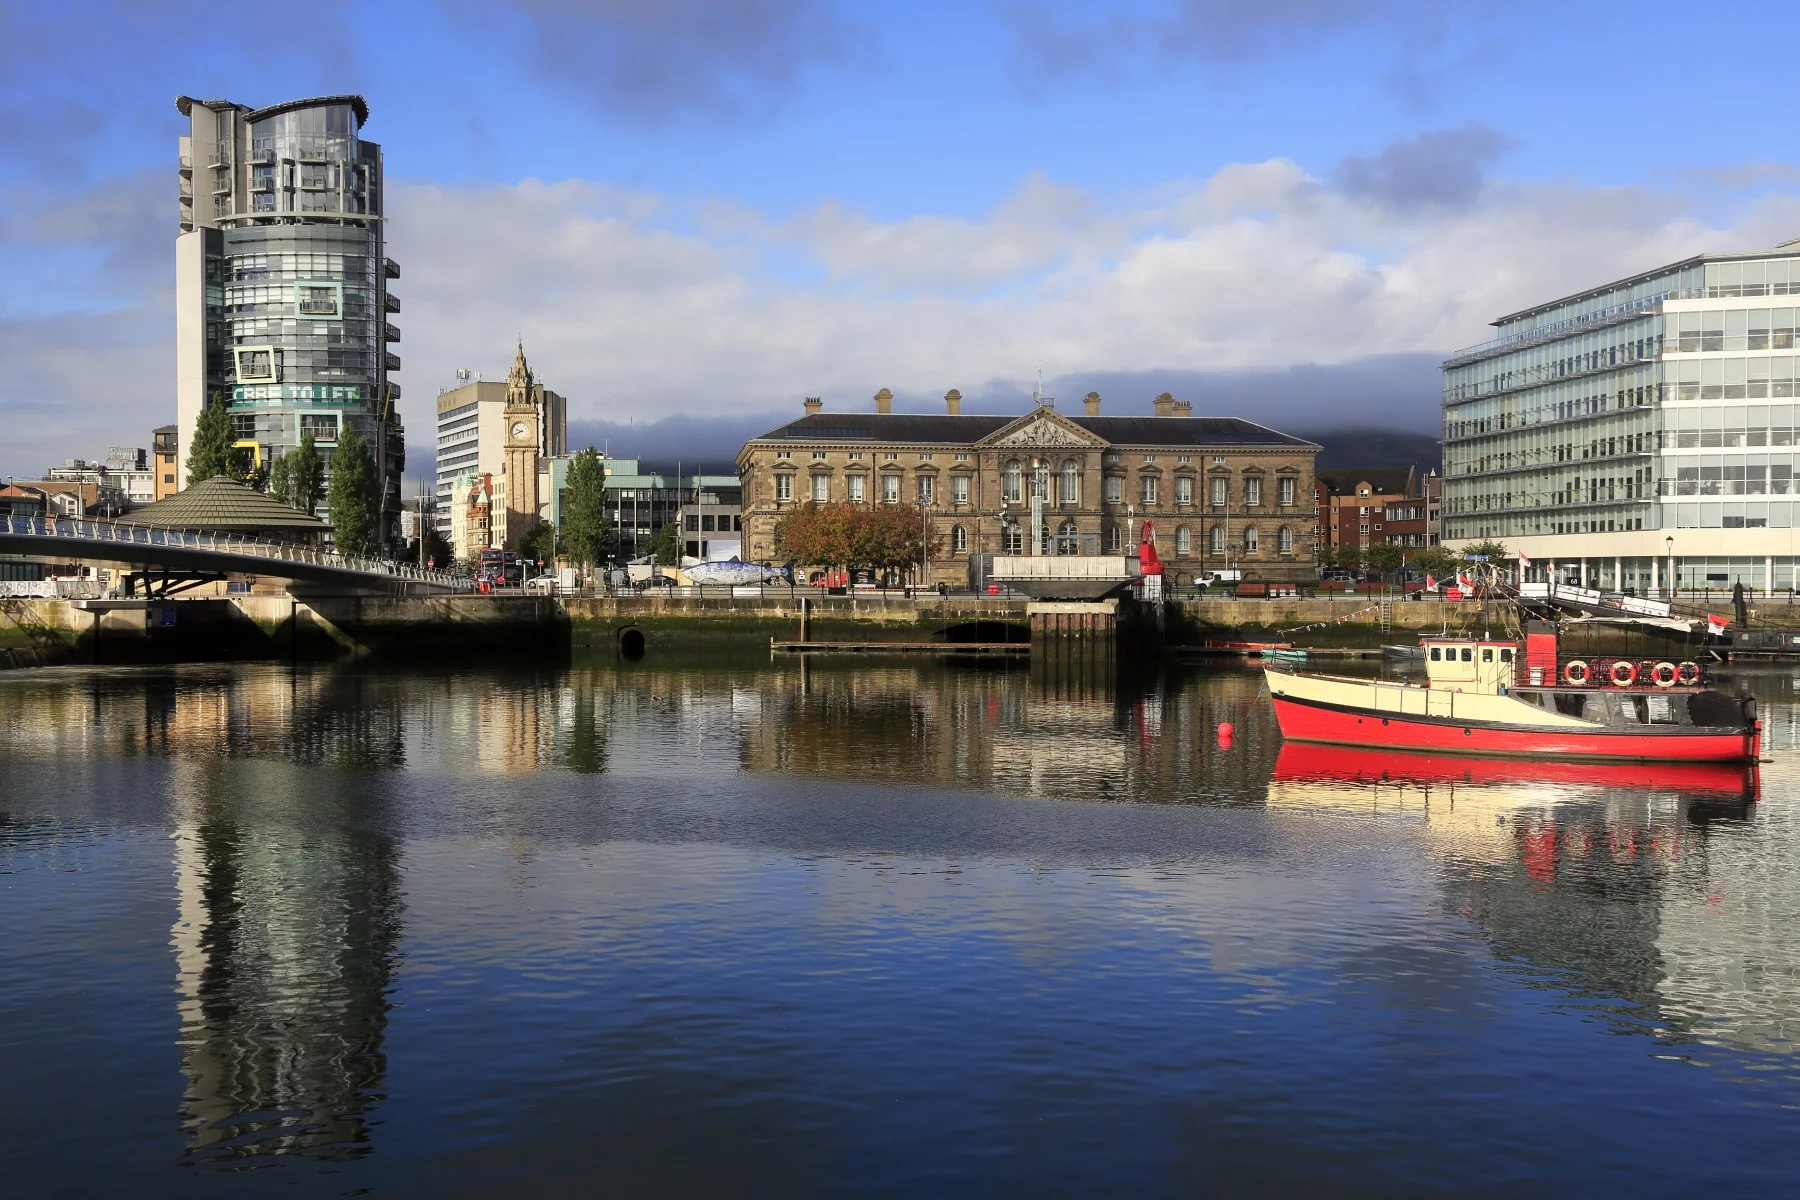 River Lagan with Custom House and the view of city center of Belfast in the background